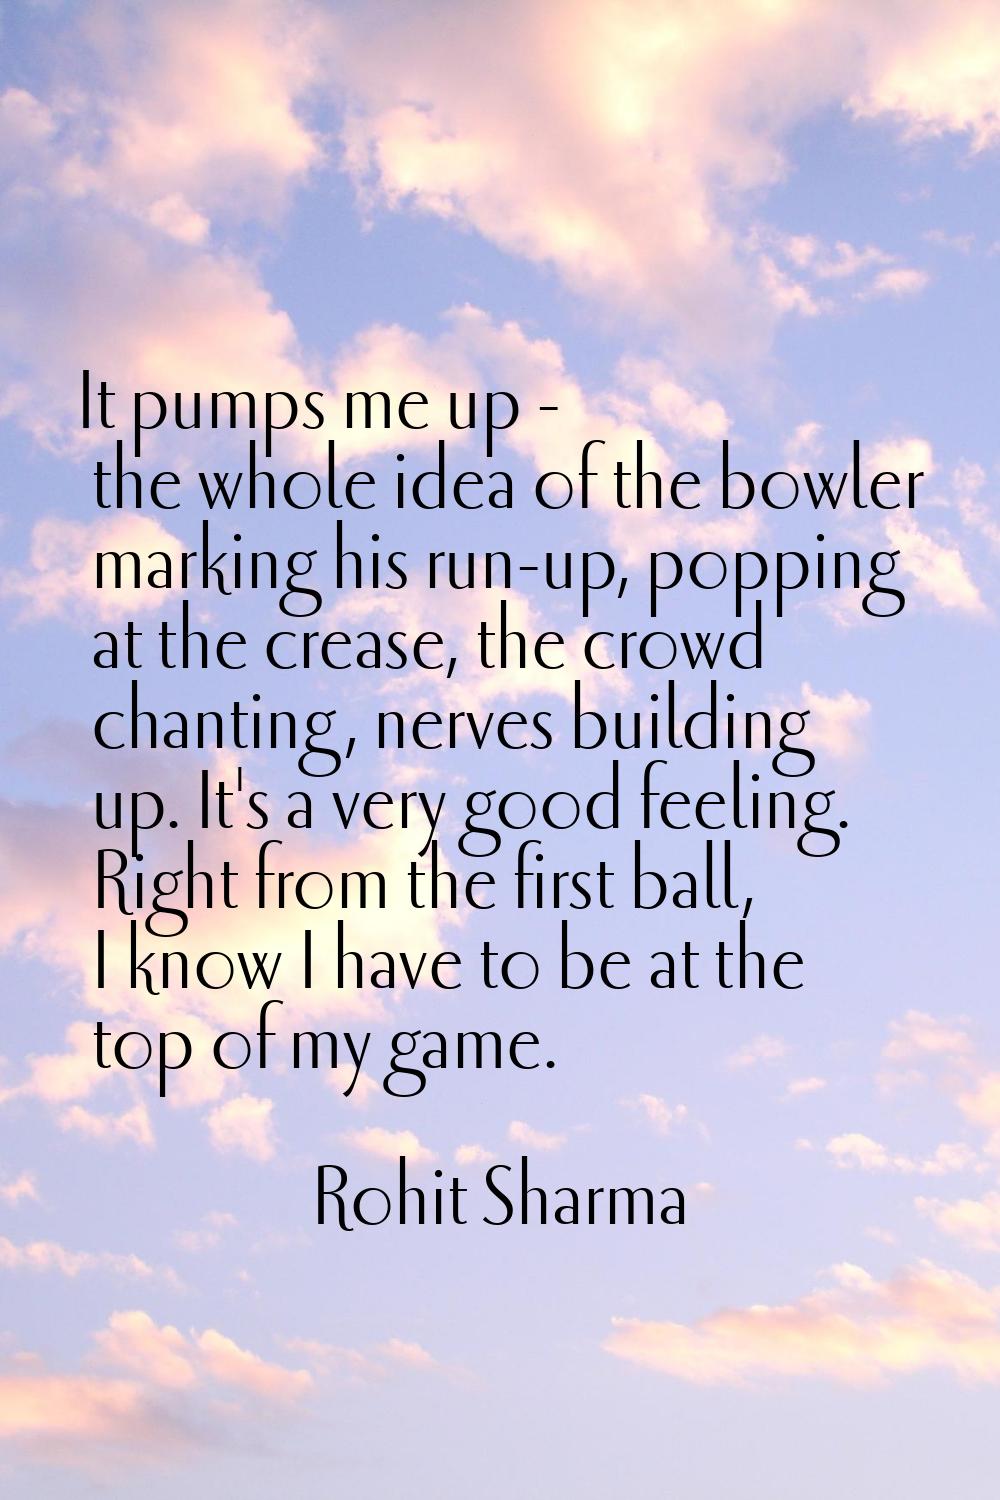 It pumps me up - the whole idea of the bowler marking his run-up, popping at the crease, the crowd 